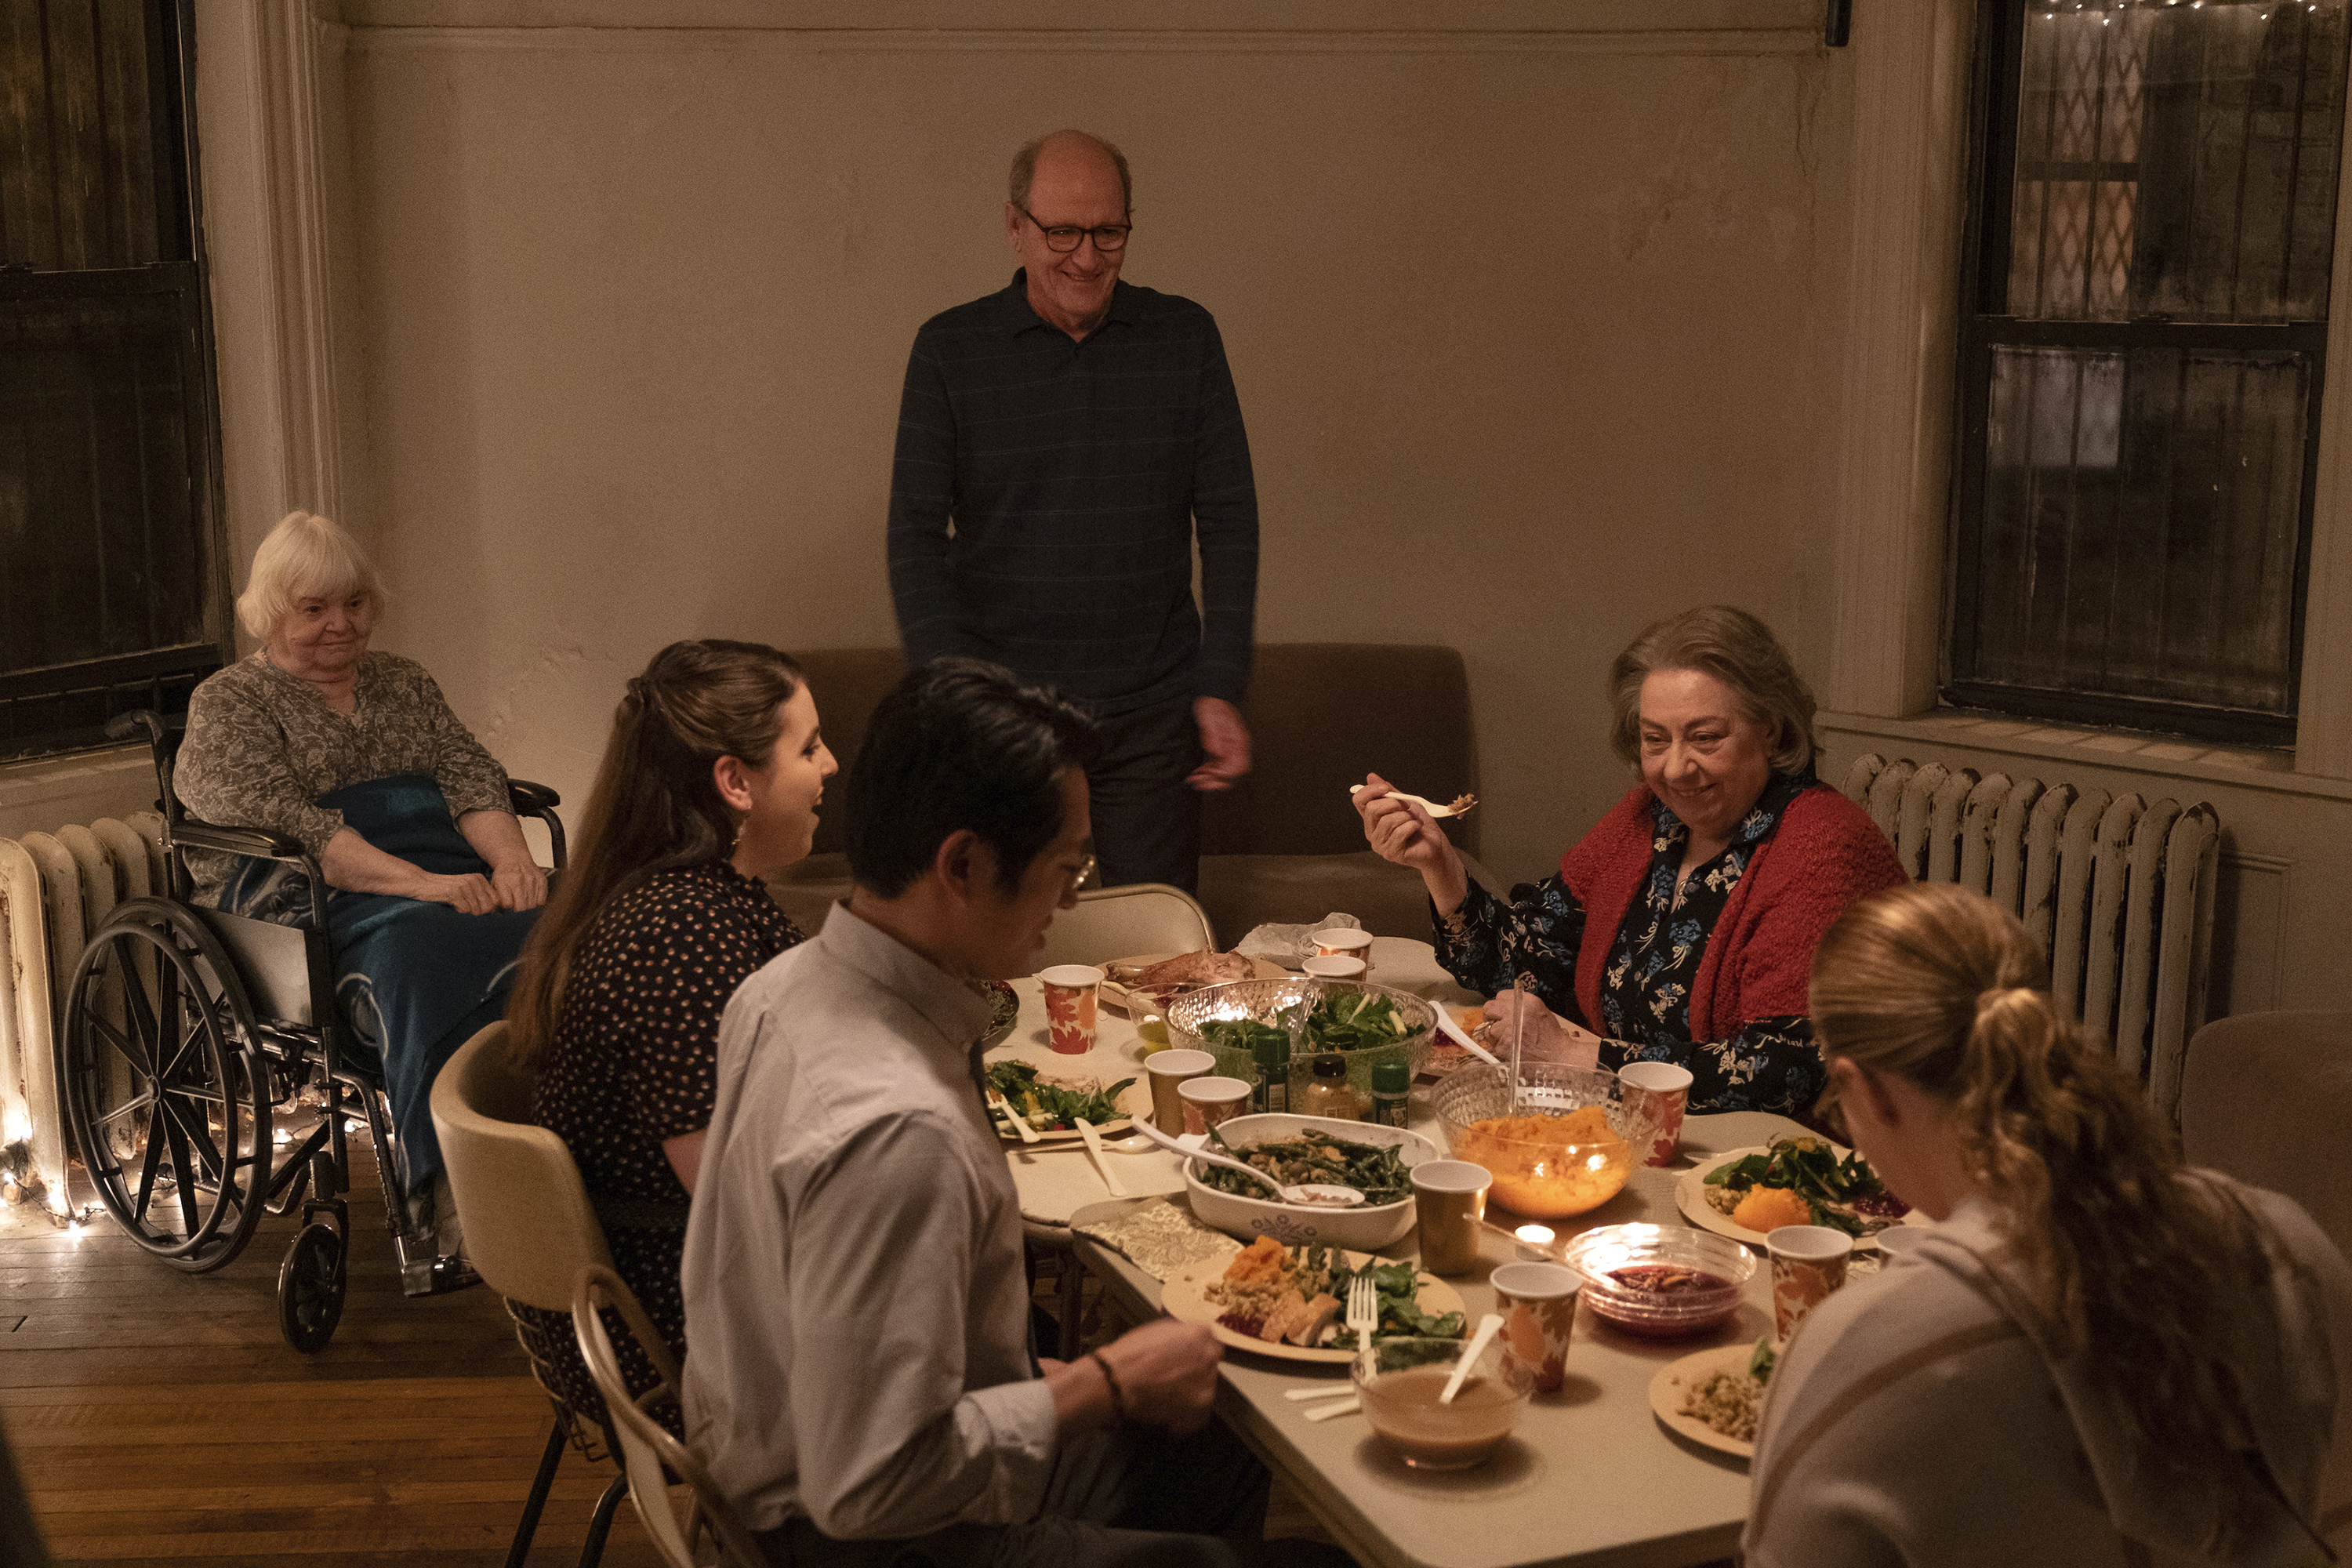 From left to right: June Squibb, Beanie Feldstein, Steven Yeun, Richard Jenkins, Jayne Houdyshell and Amy Schumer in "Humans."